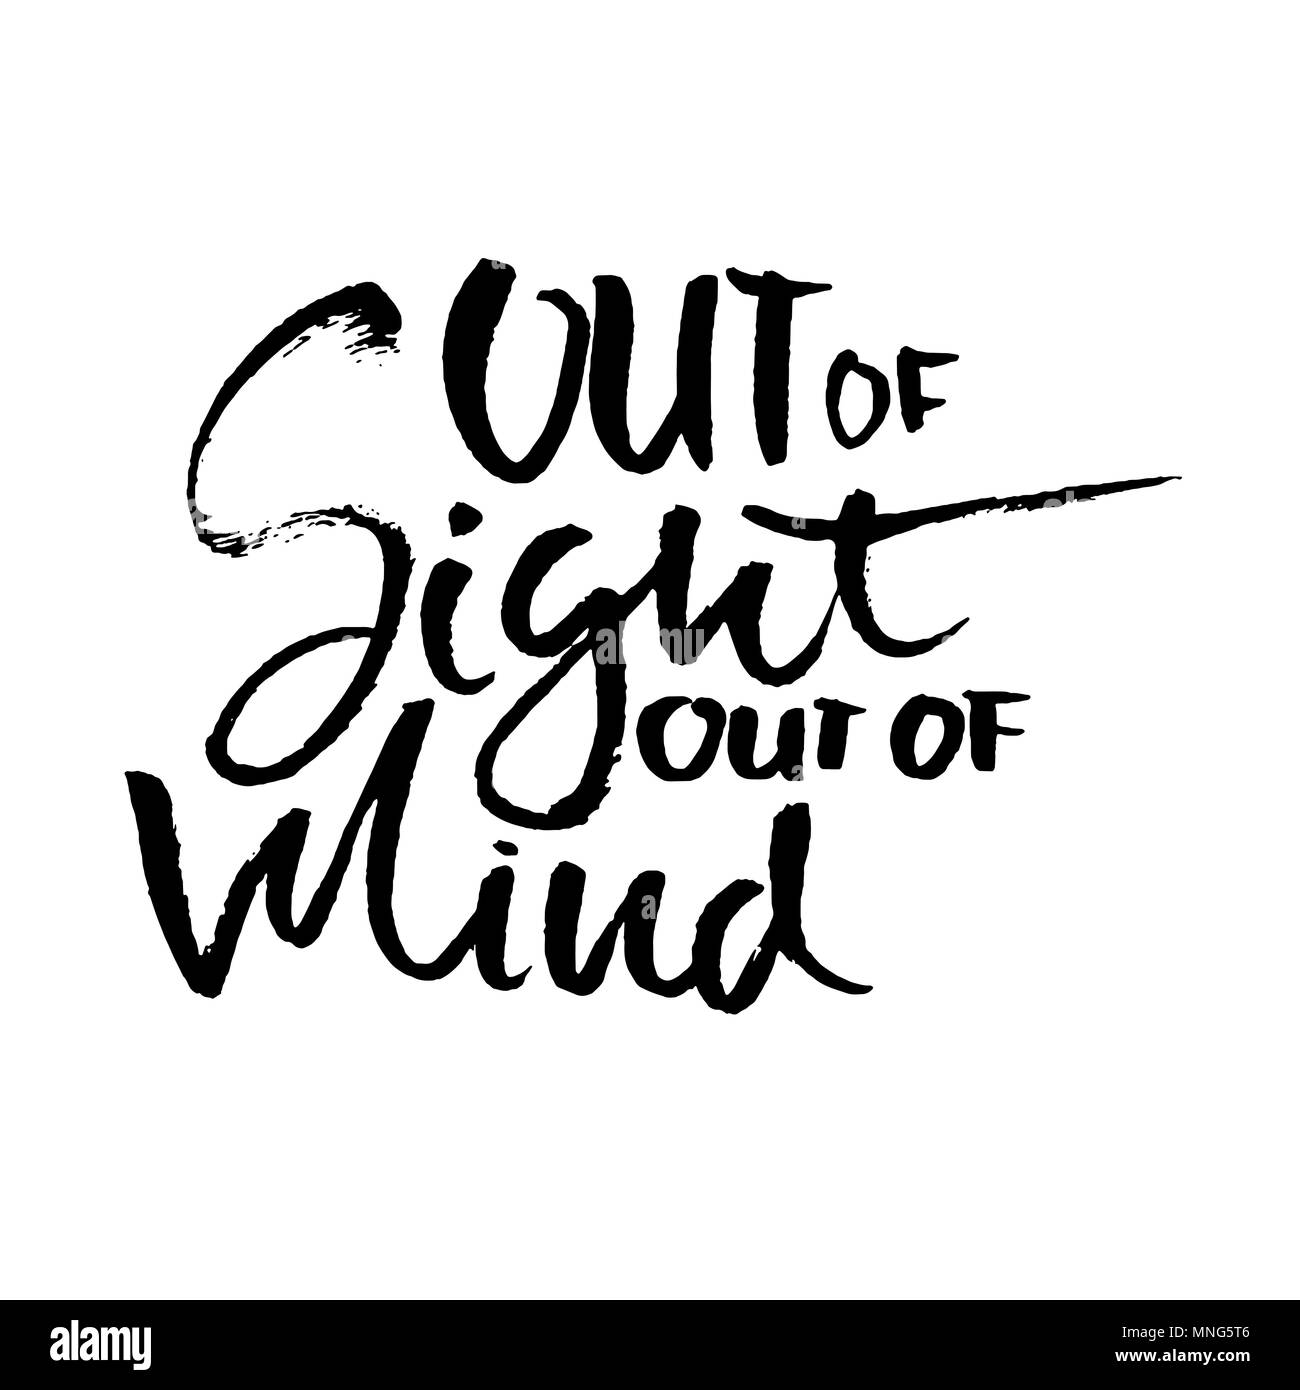 Out of sight out of mind. Hand drawn dry brush lettering. Ink illustration. Modern calligraphy phrase. Vector illustration. Stock Vector